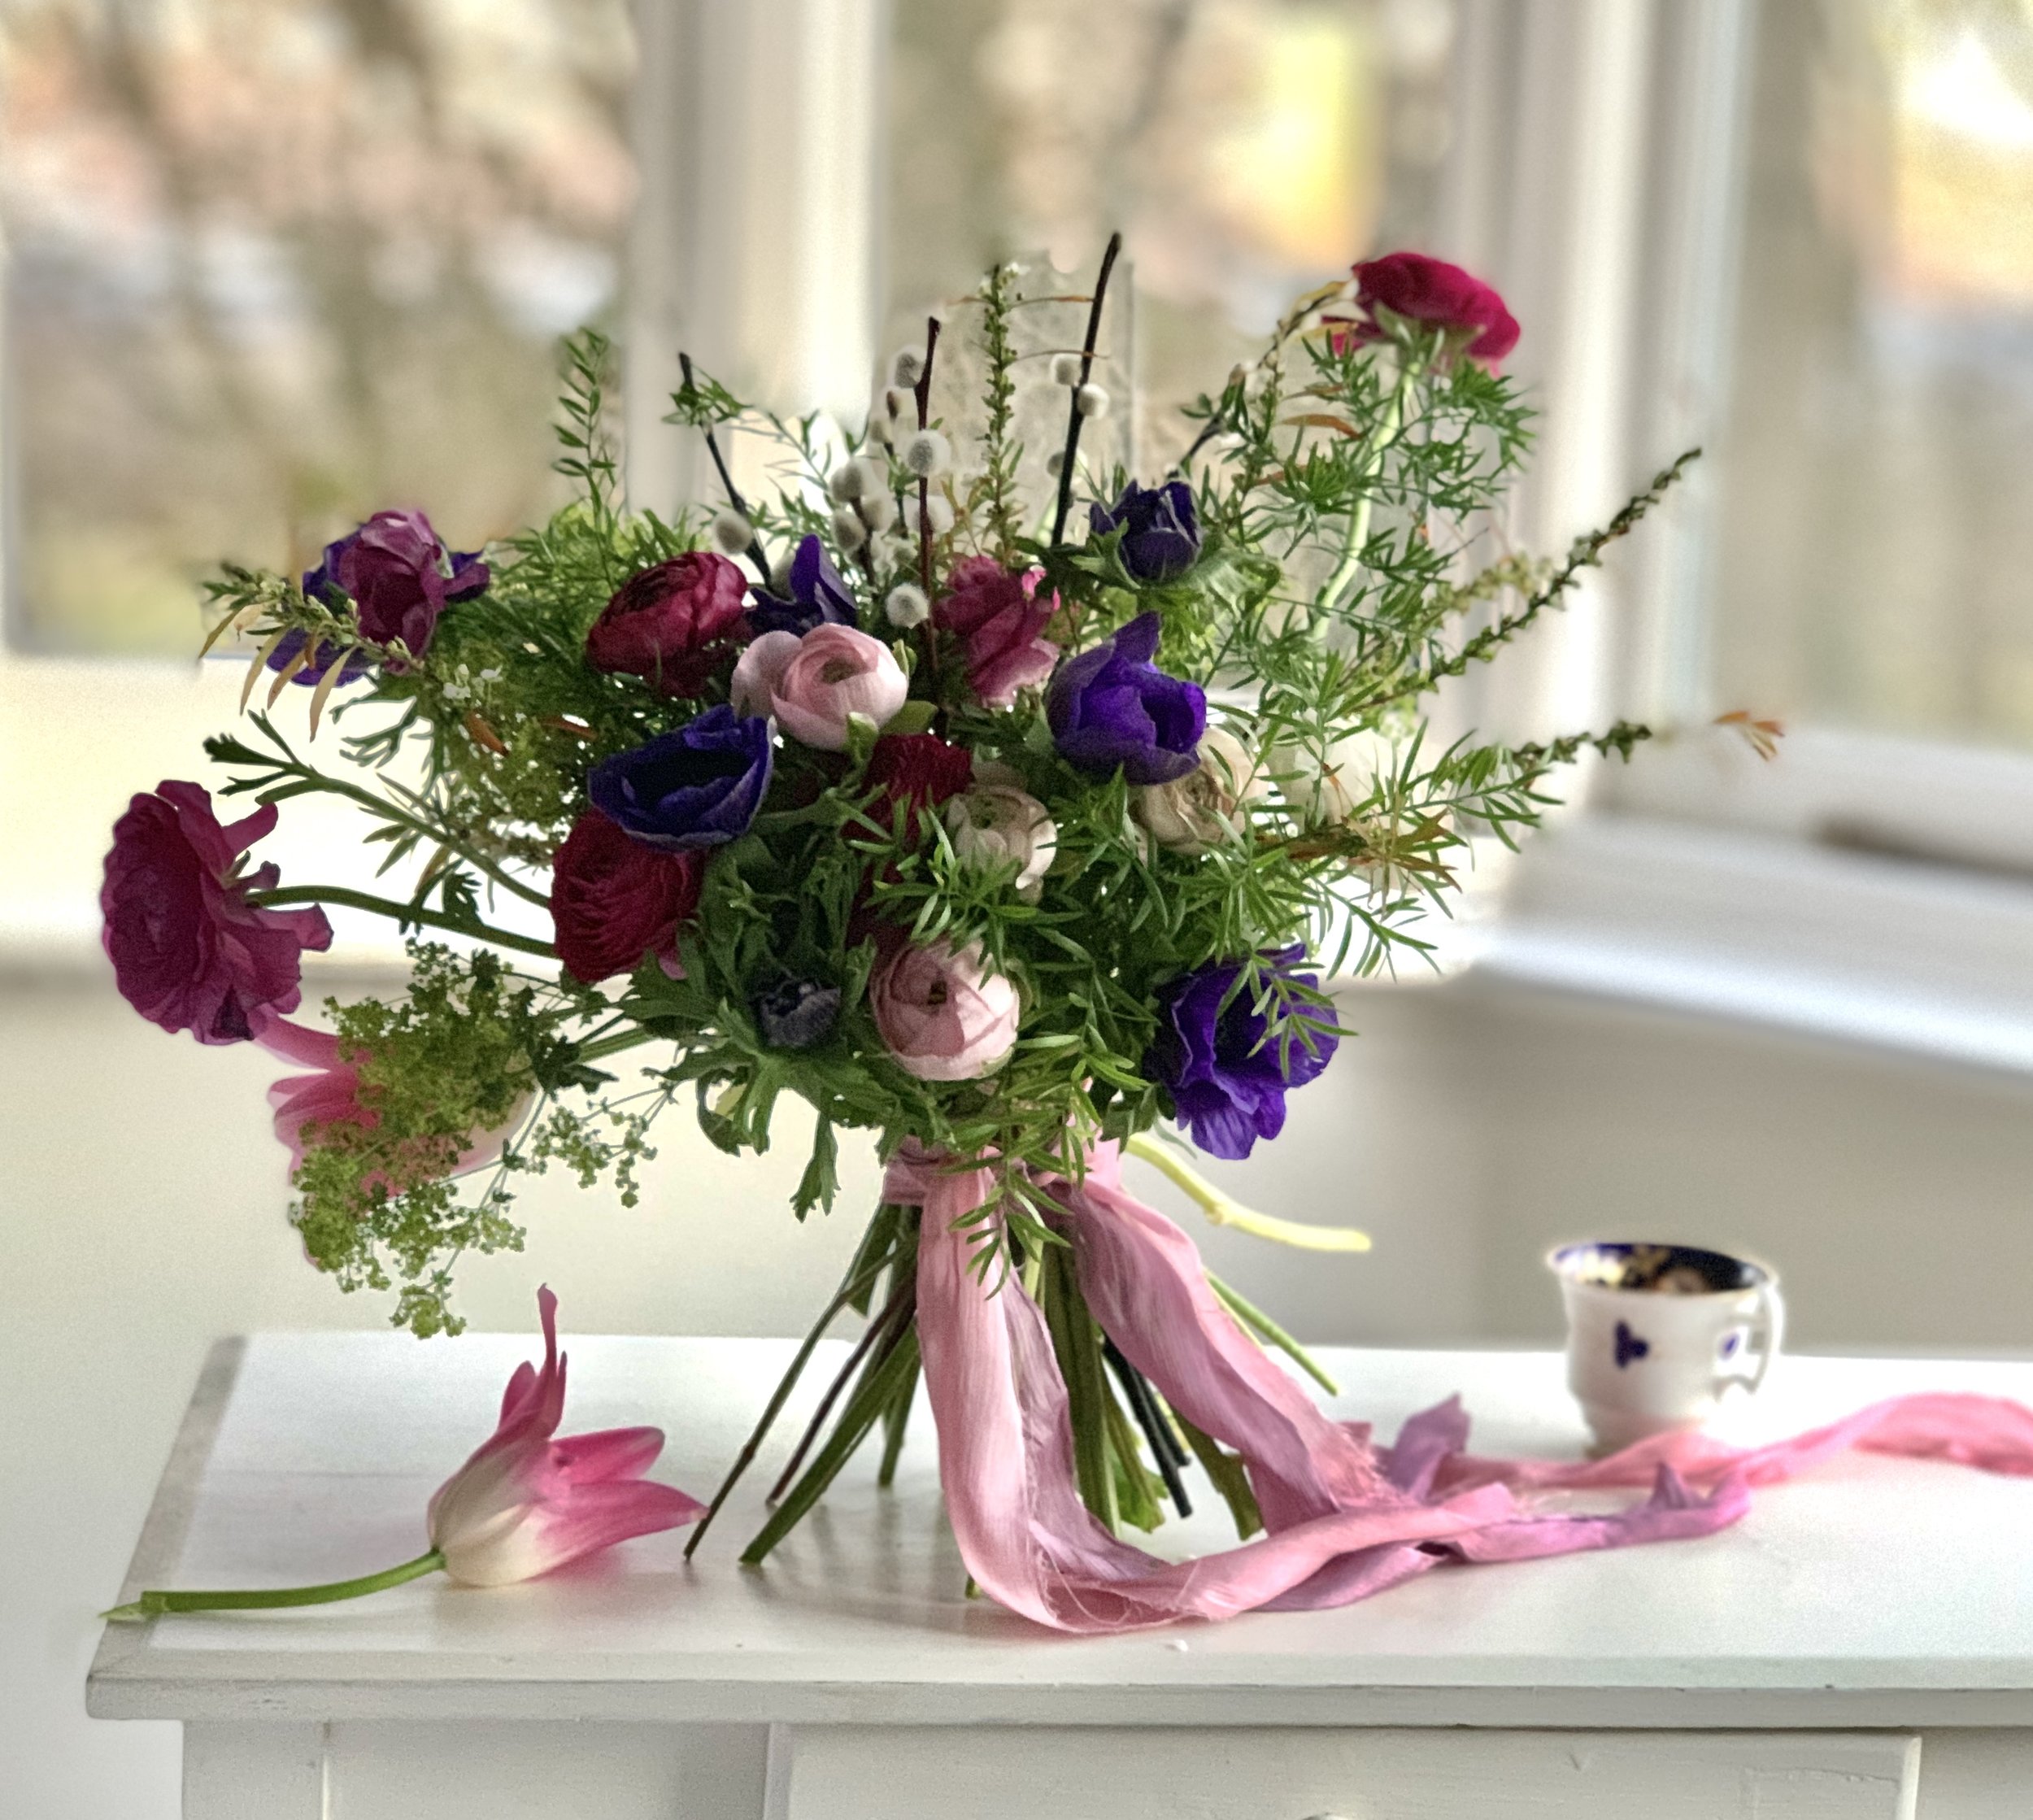 Anemone and ranunculus pinks and purples in bay window.jpg